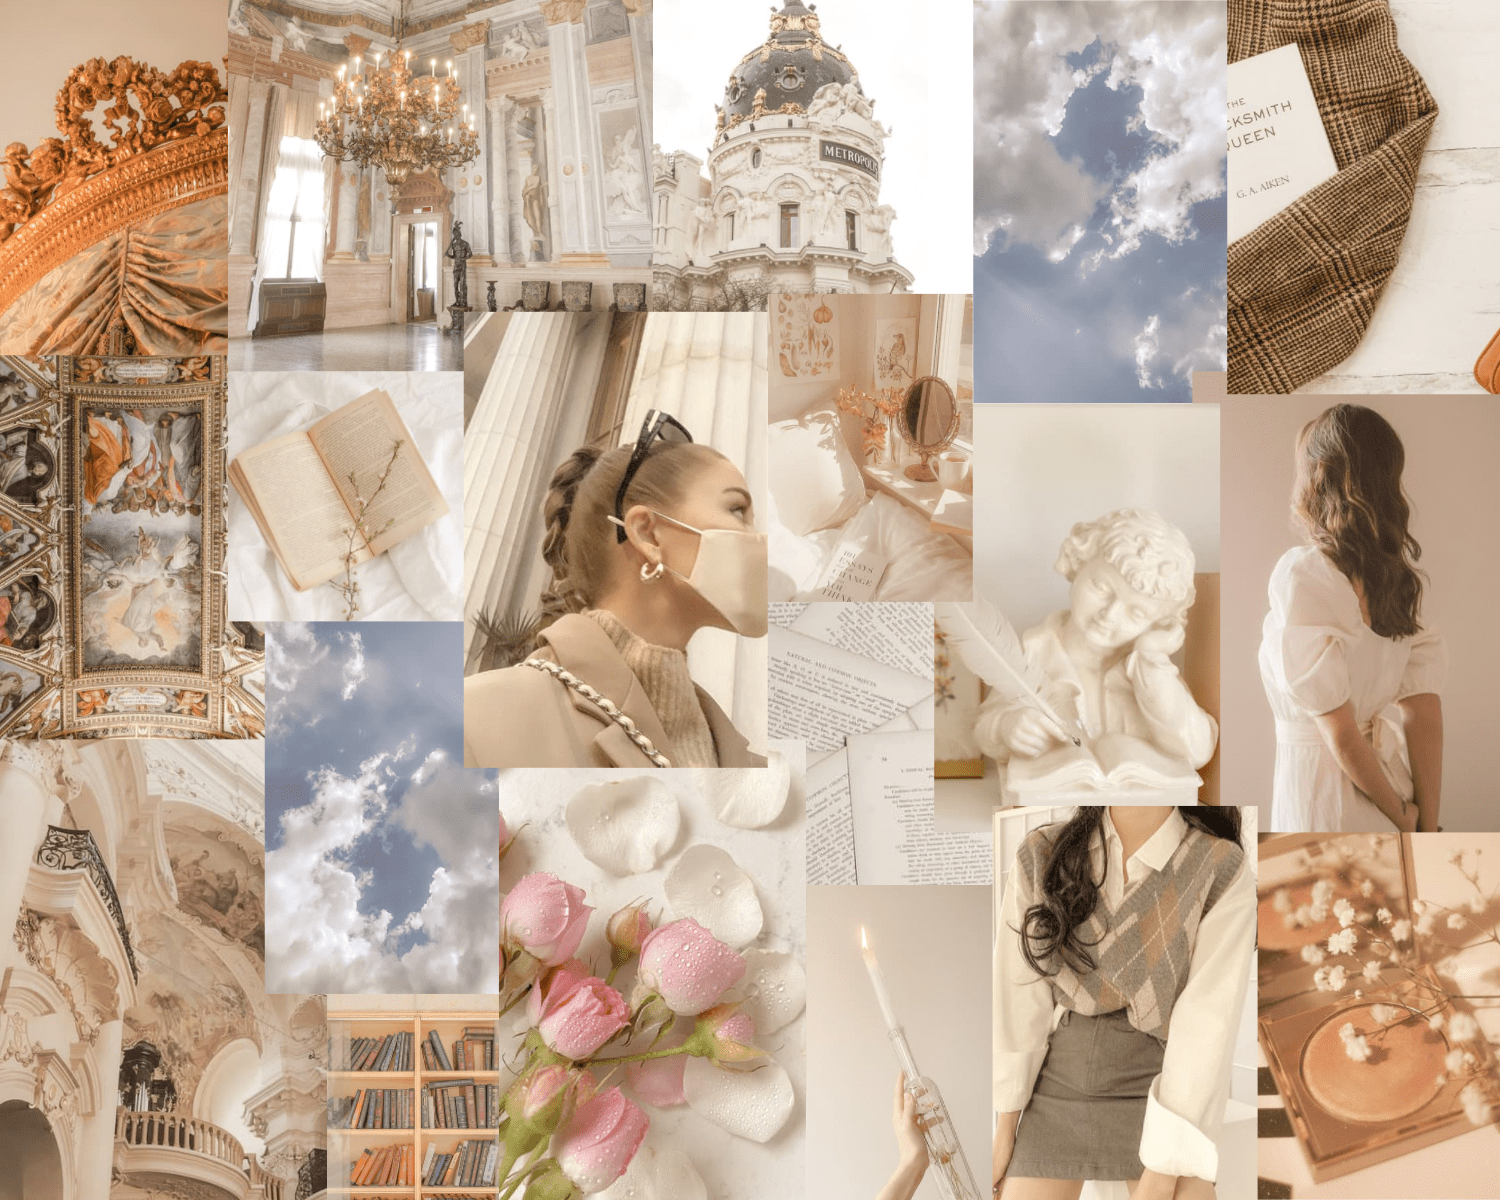 A collage of photos of a woman reading books, a city, flowers, and other things. - Light academia